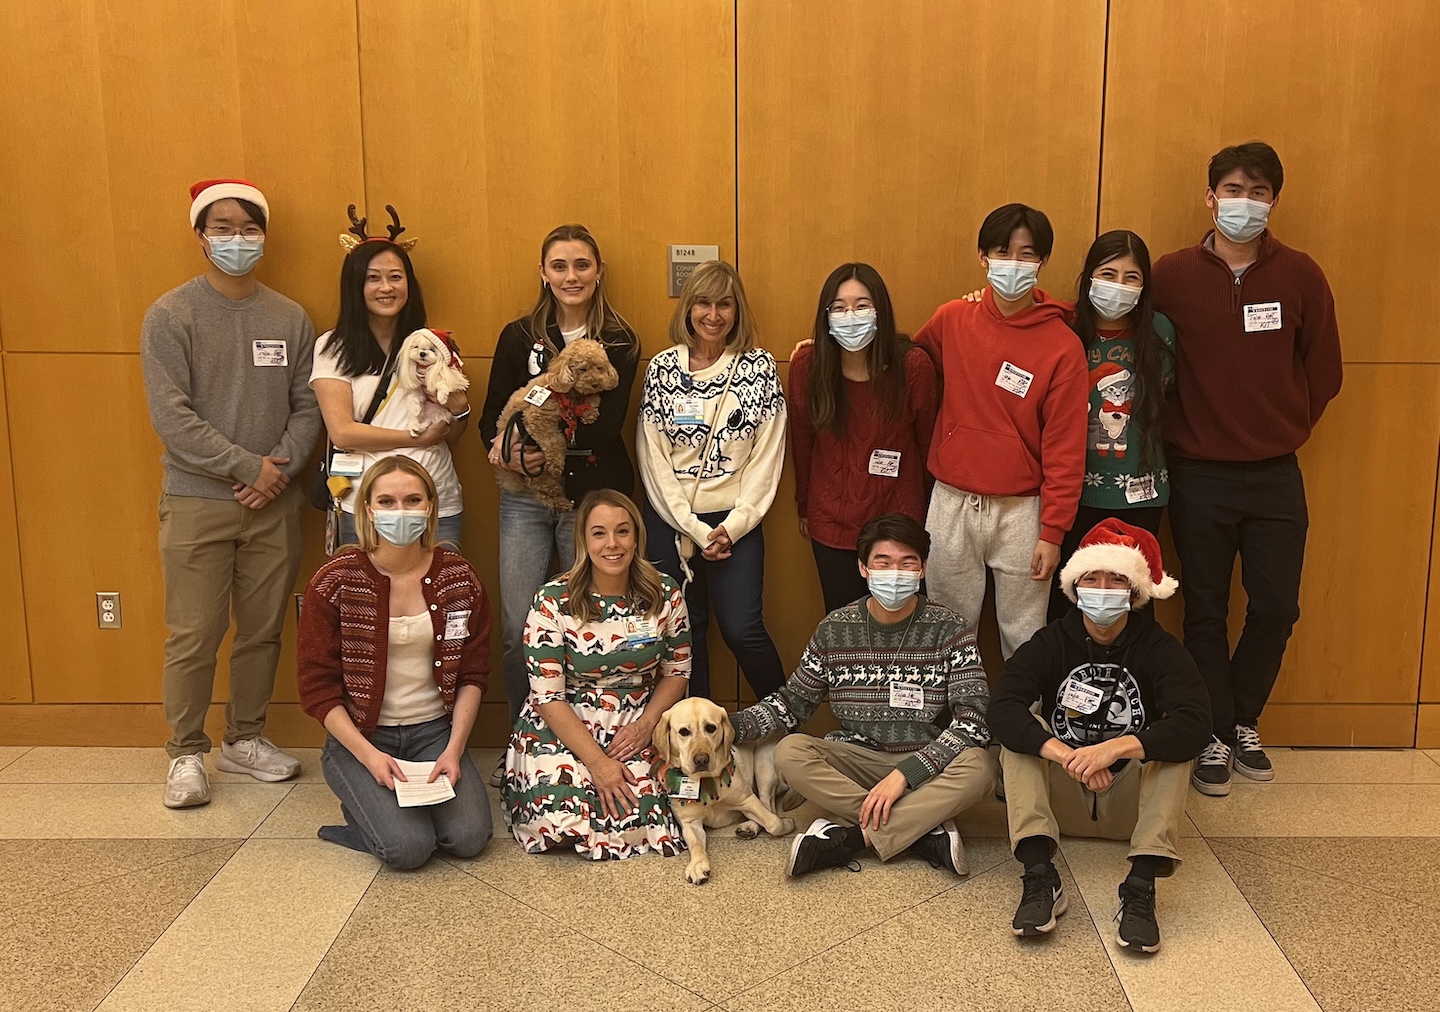 Medleys caroling with People-Animal Connection